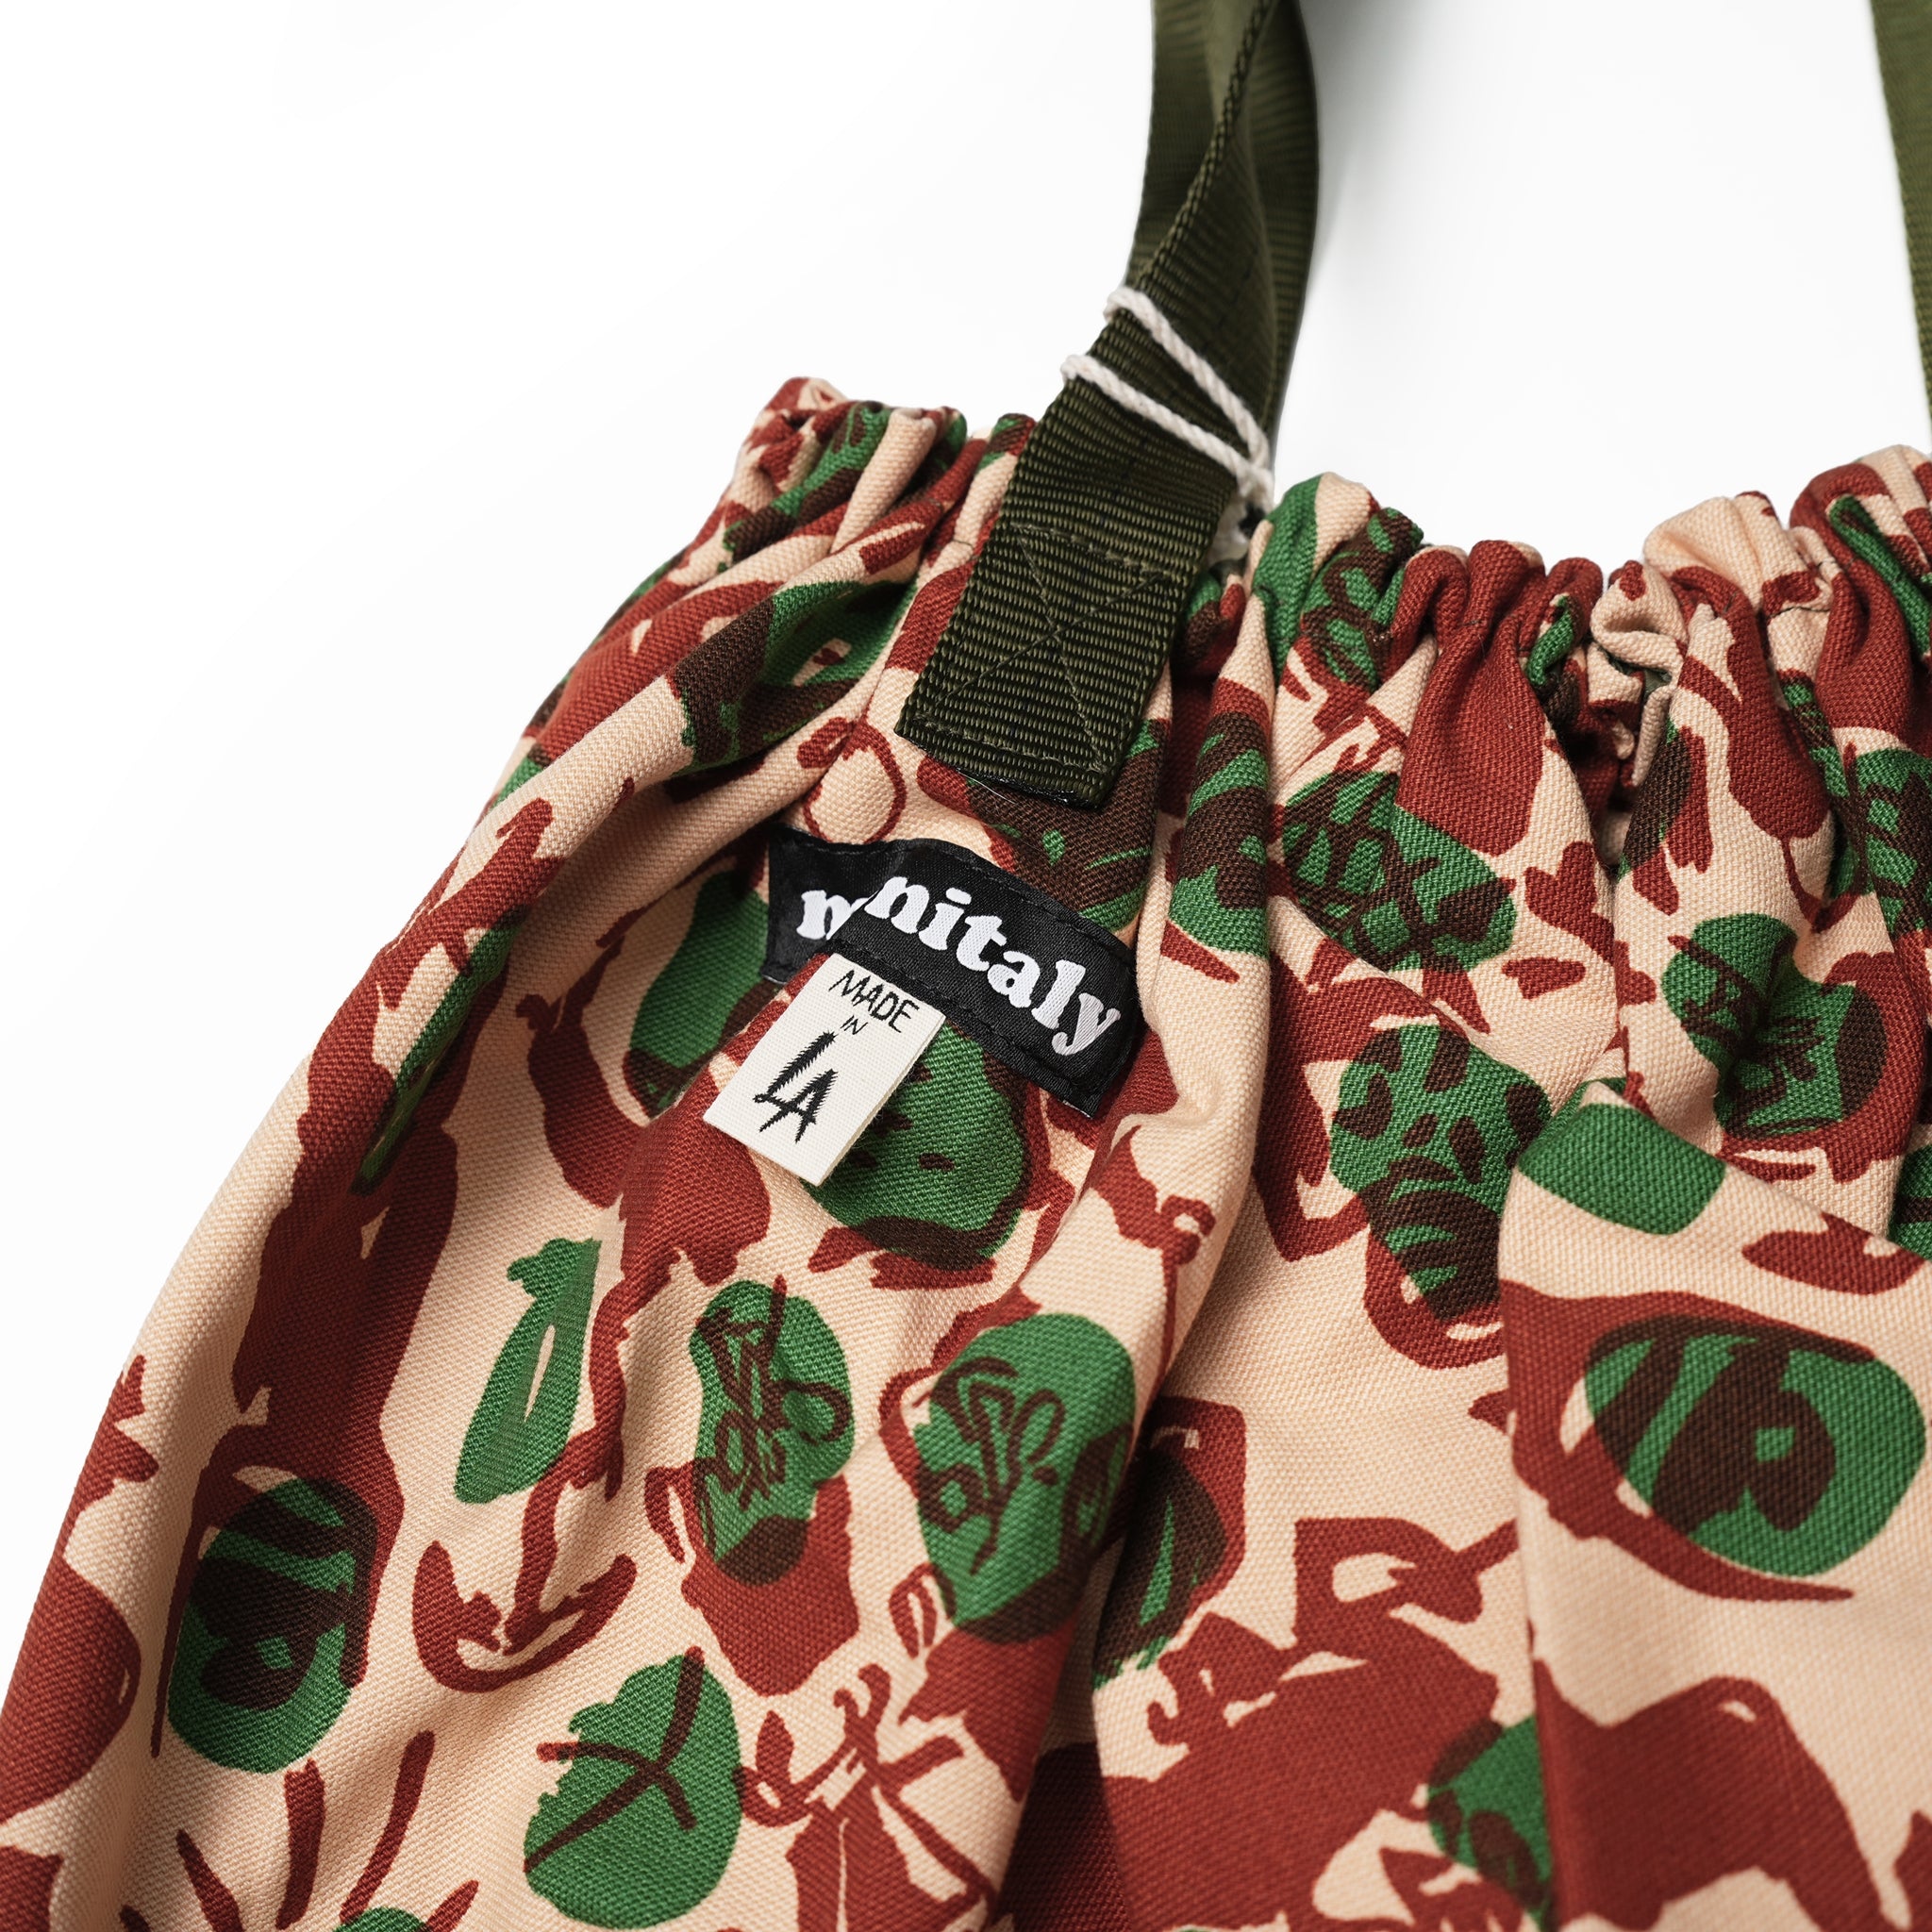 No:M32902-1 | Name:Gathering Bag | Color:Camo【MONITALY_モニタリー】【epperson mountaineering】